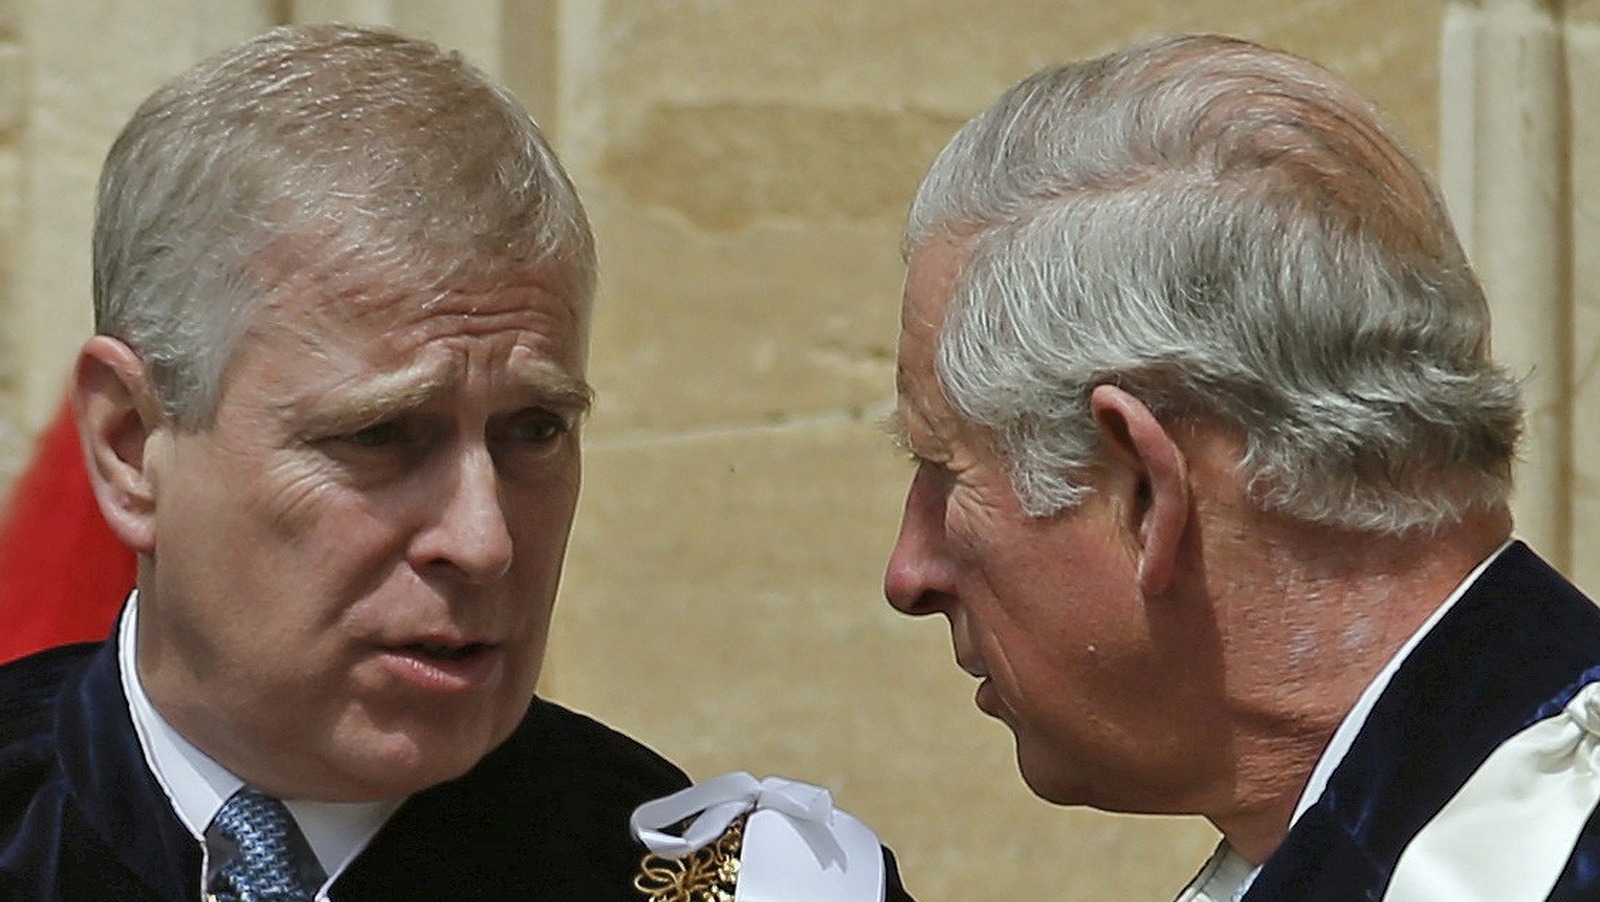 Prince Charles to reportedly pay Andrew’s sex abuse settlement